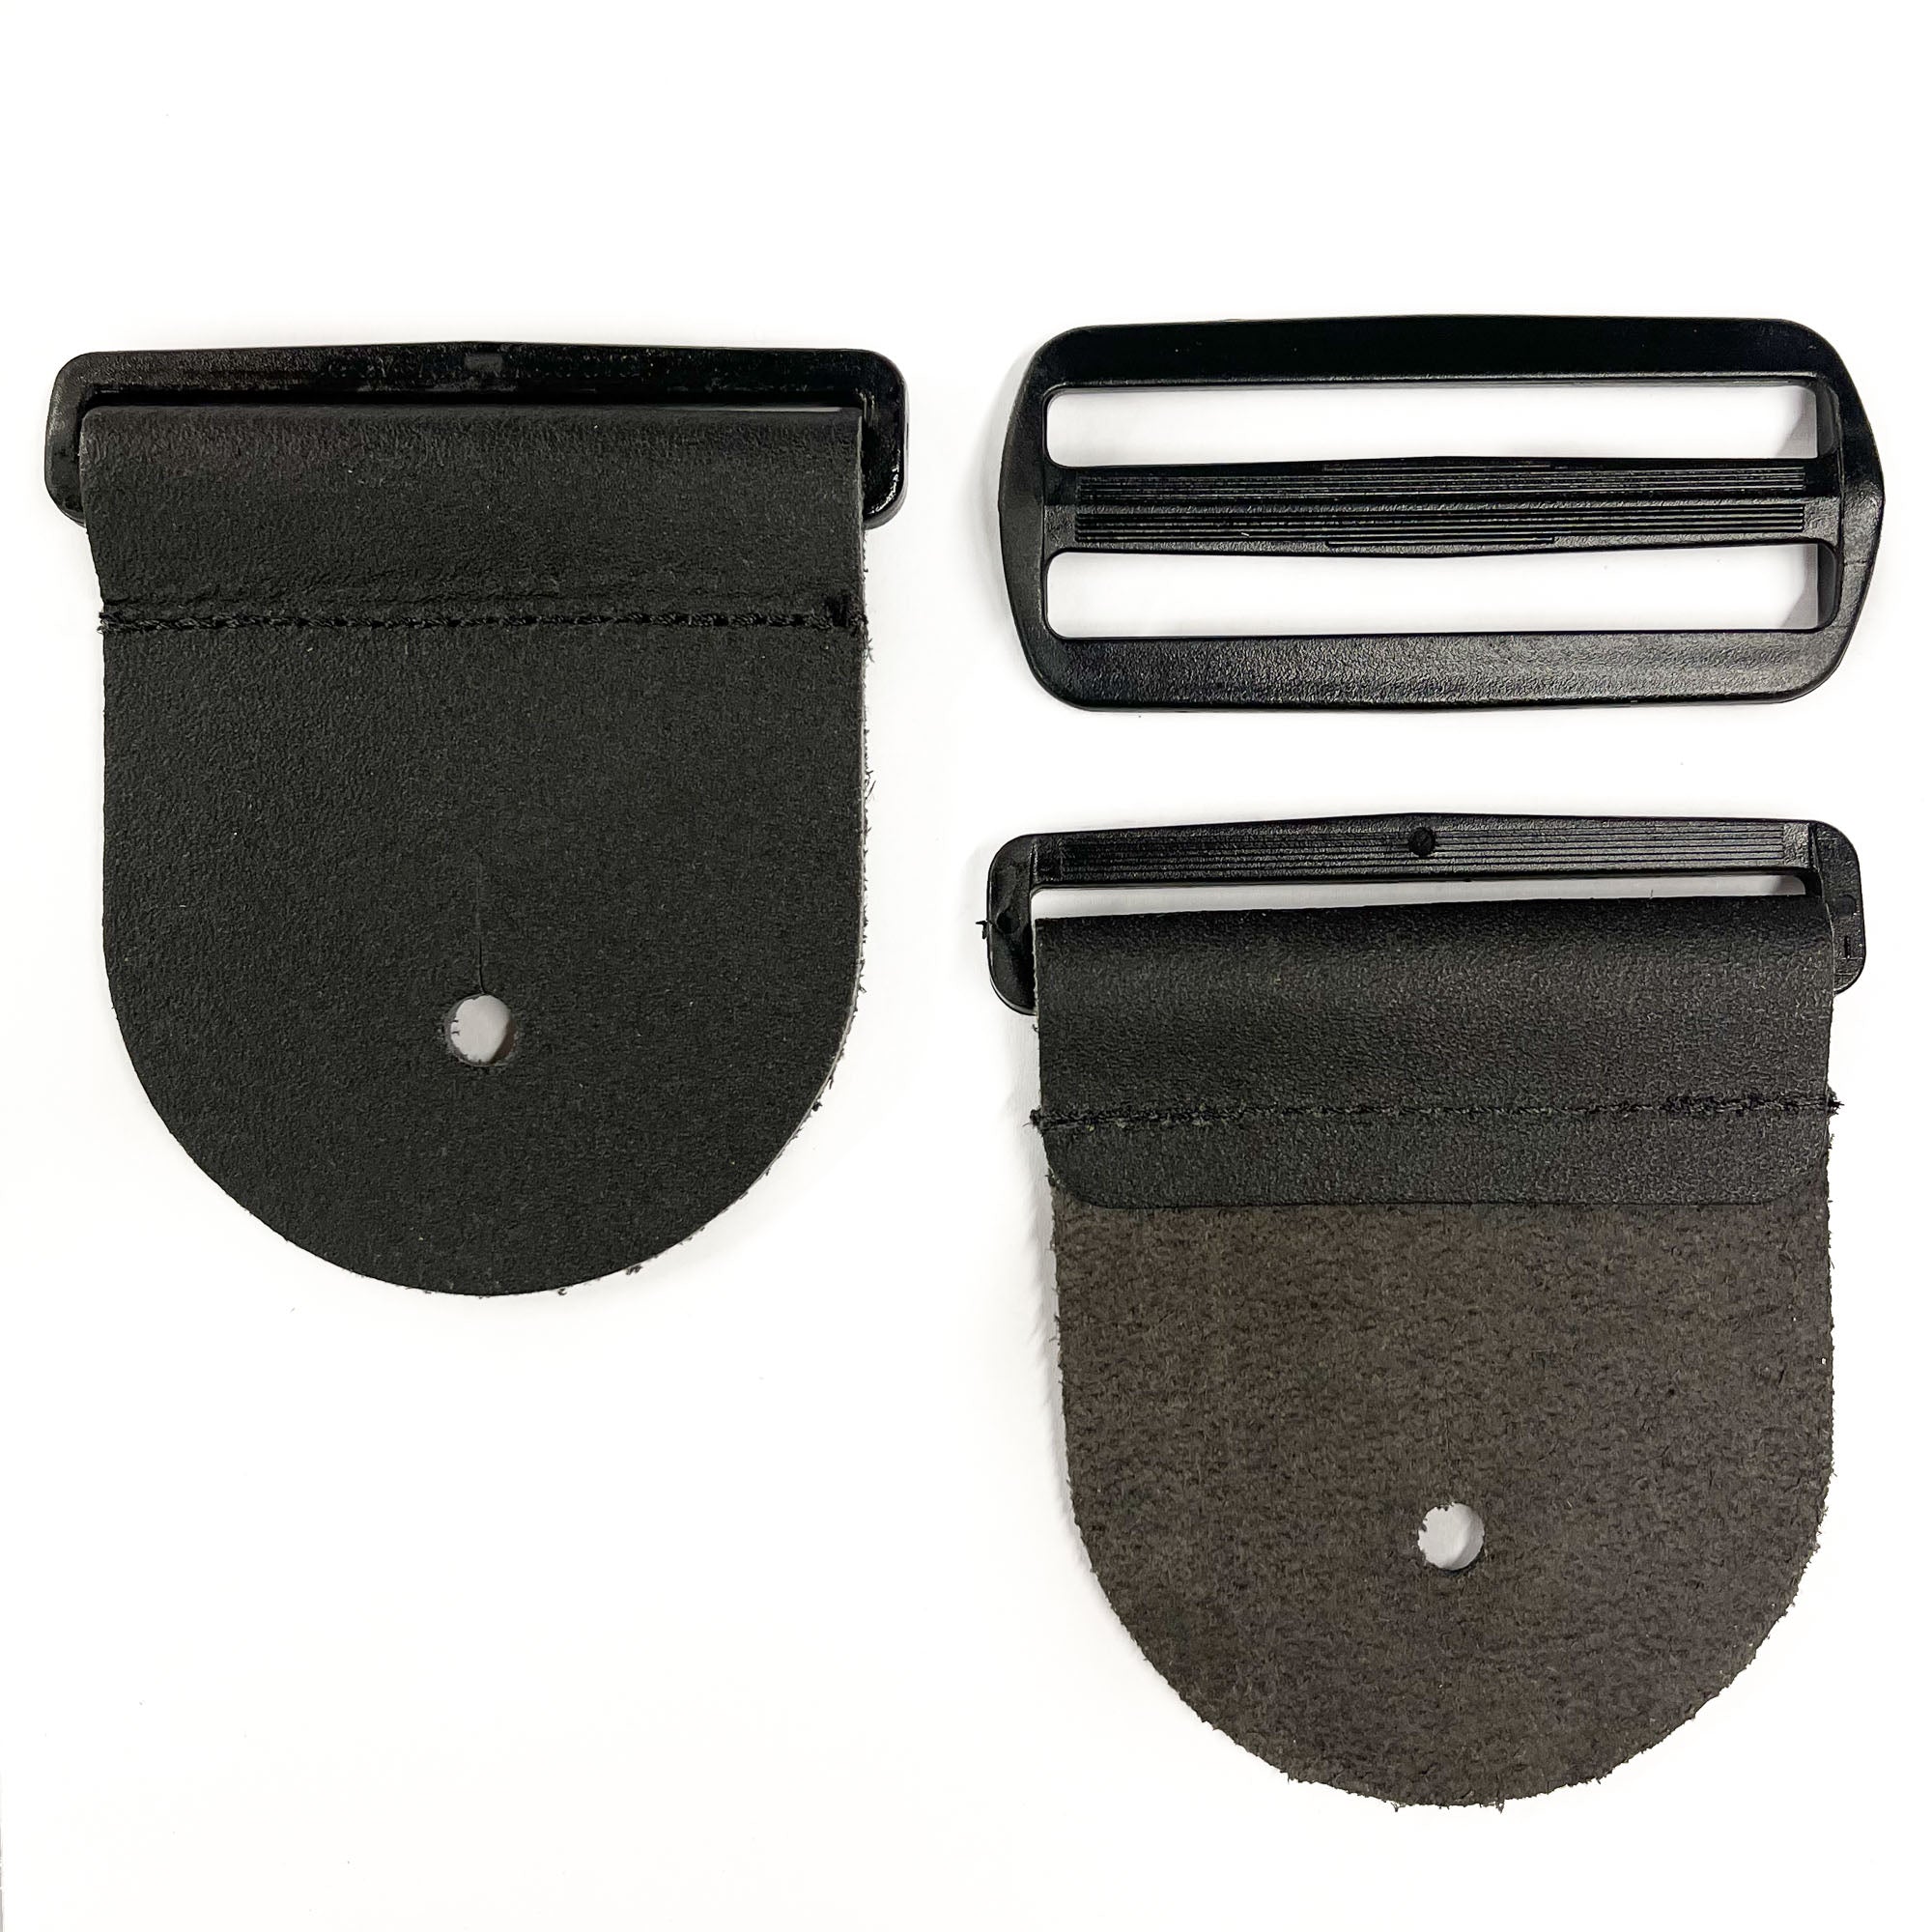 3-Inch Leather Guitar Strap Kit | PolyAcetal Hardware | Rounded End